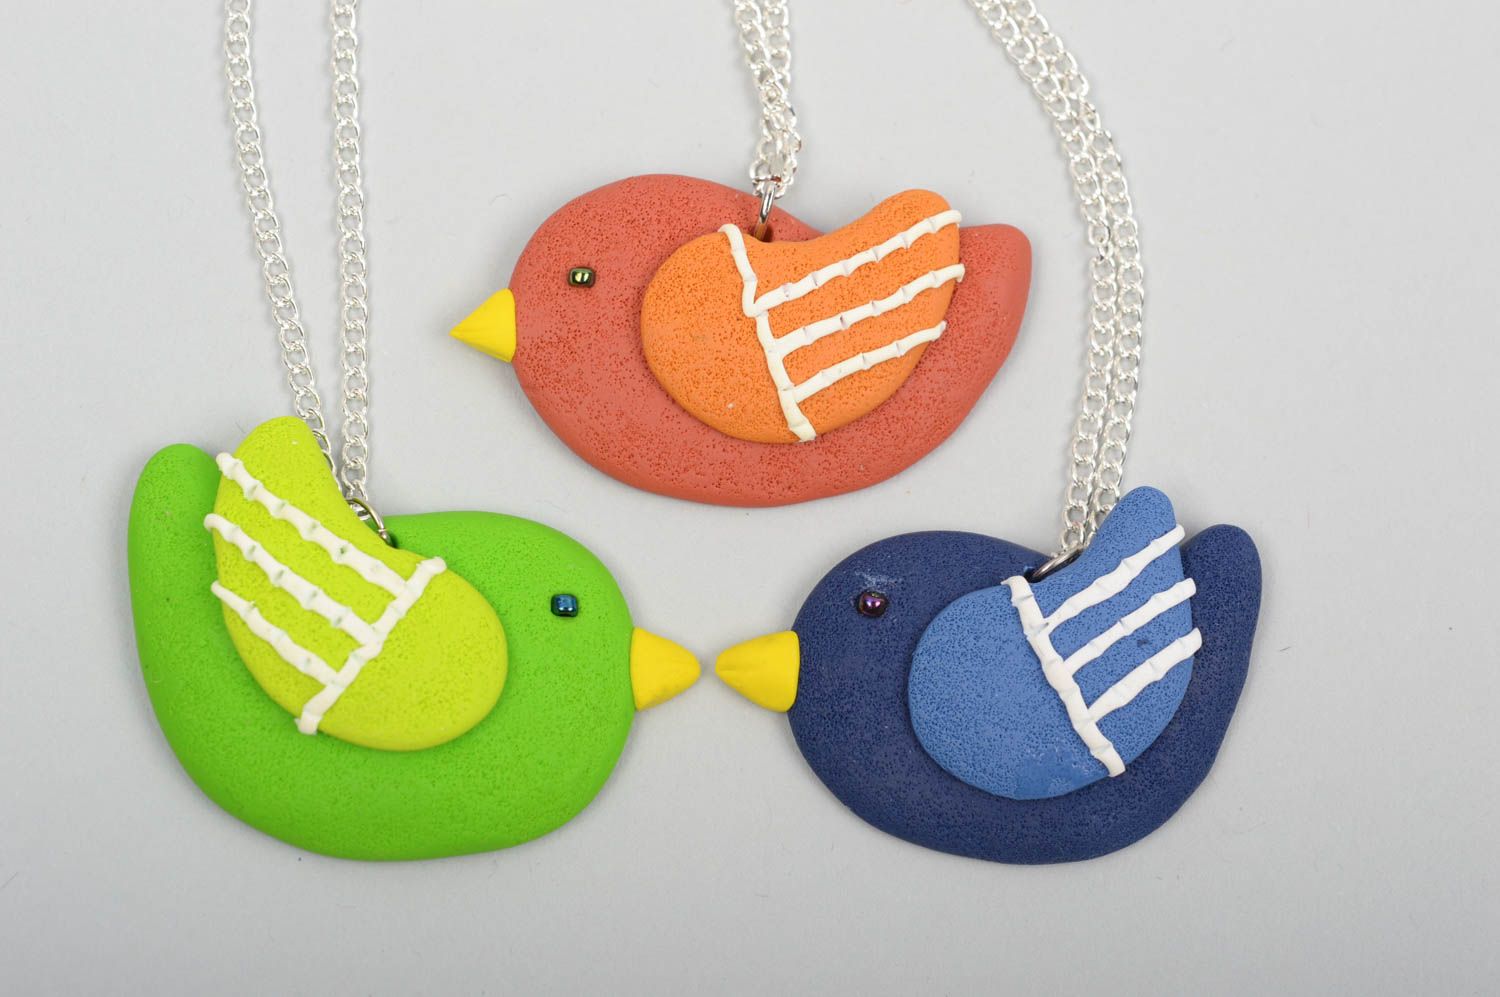 Fashion necklace handmade jewelry set polymer clay pendant necklaces kids gifts photo 1